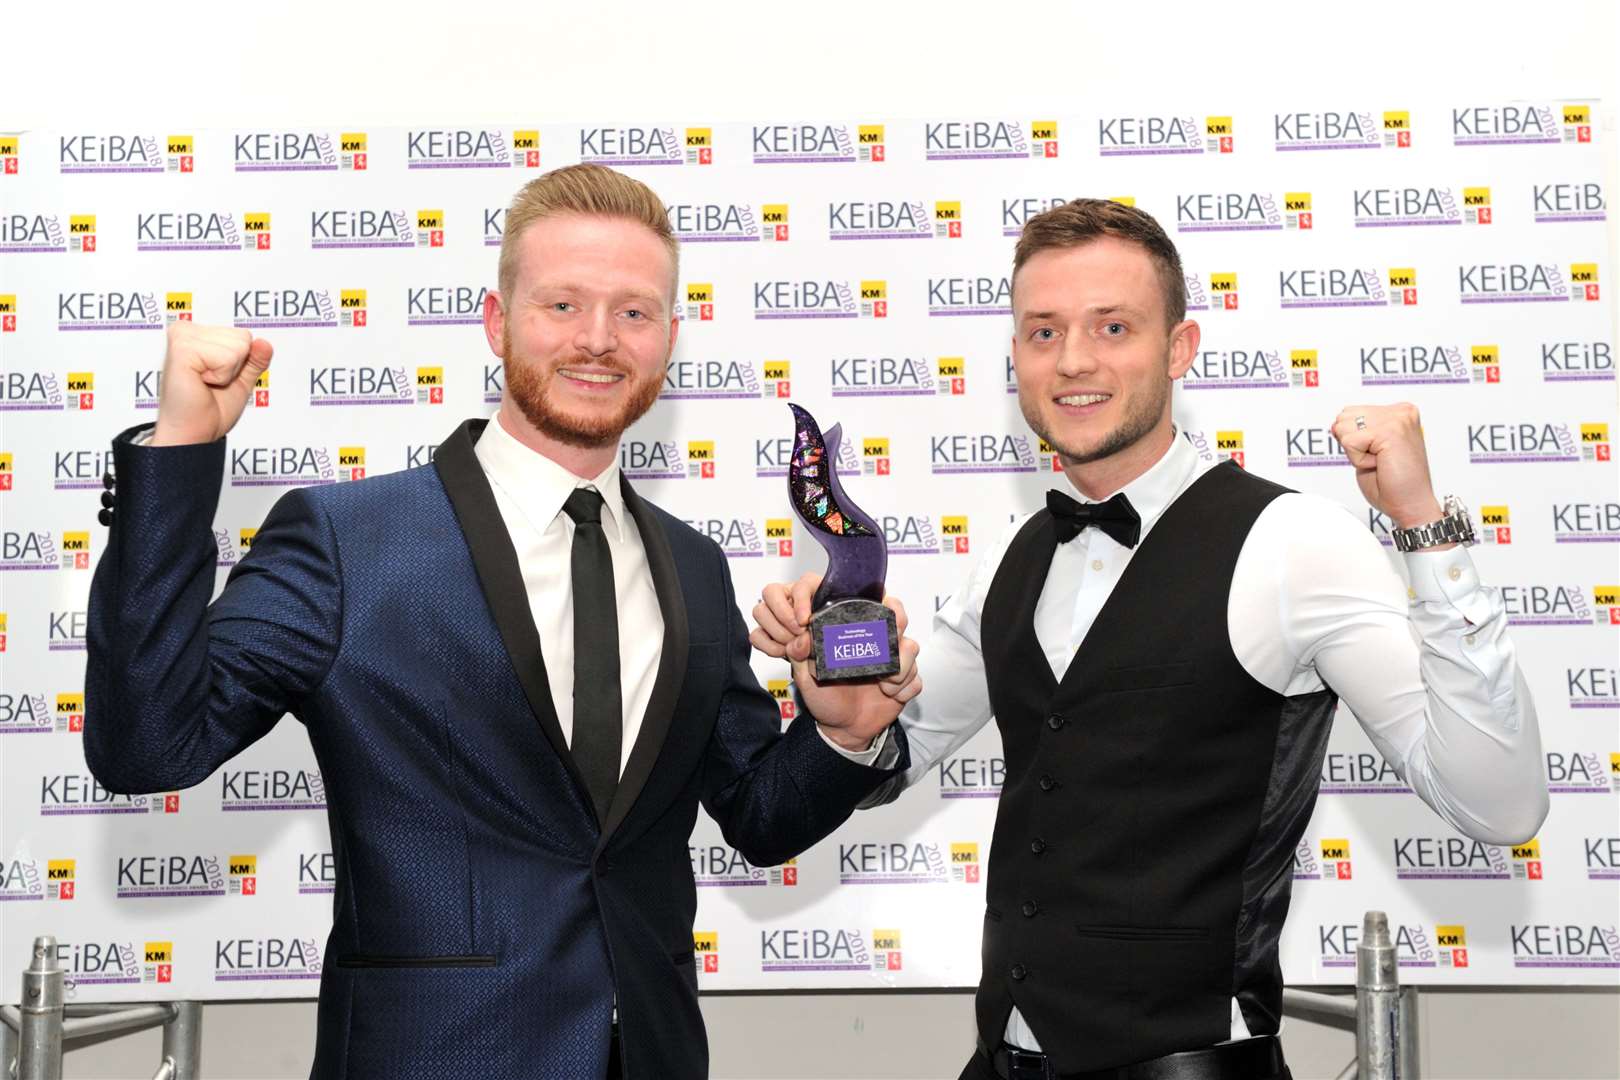 Jason Smith and Andy Smith of Bedfont Scientific celebrate winning Technology Business of the Year at KEiBA 2018